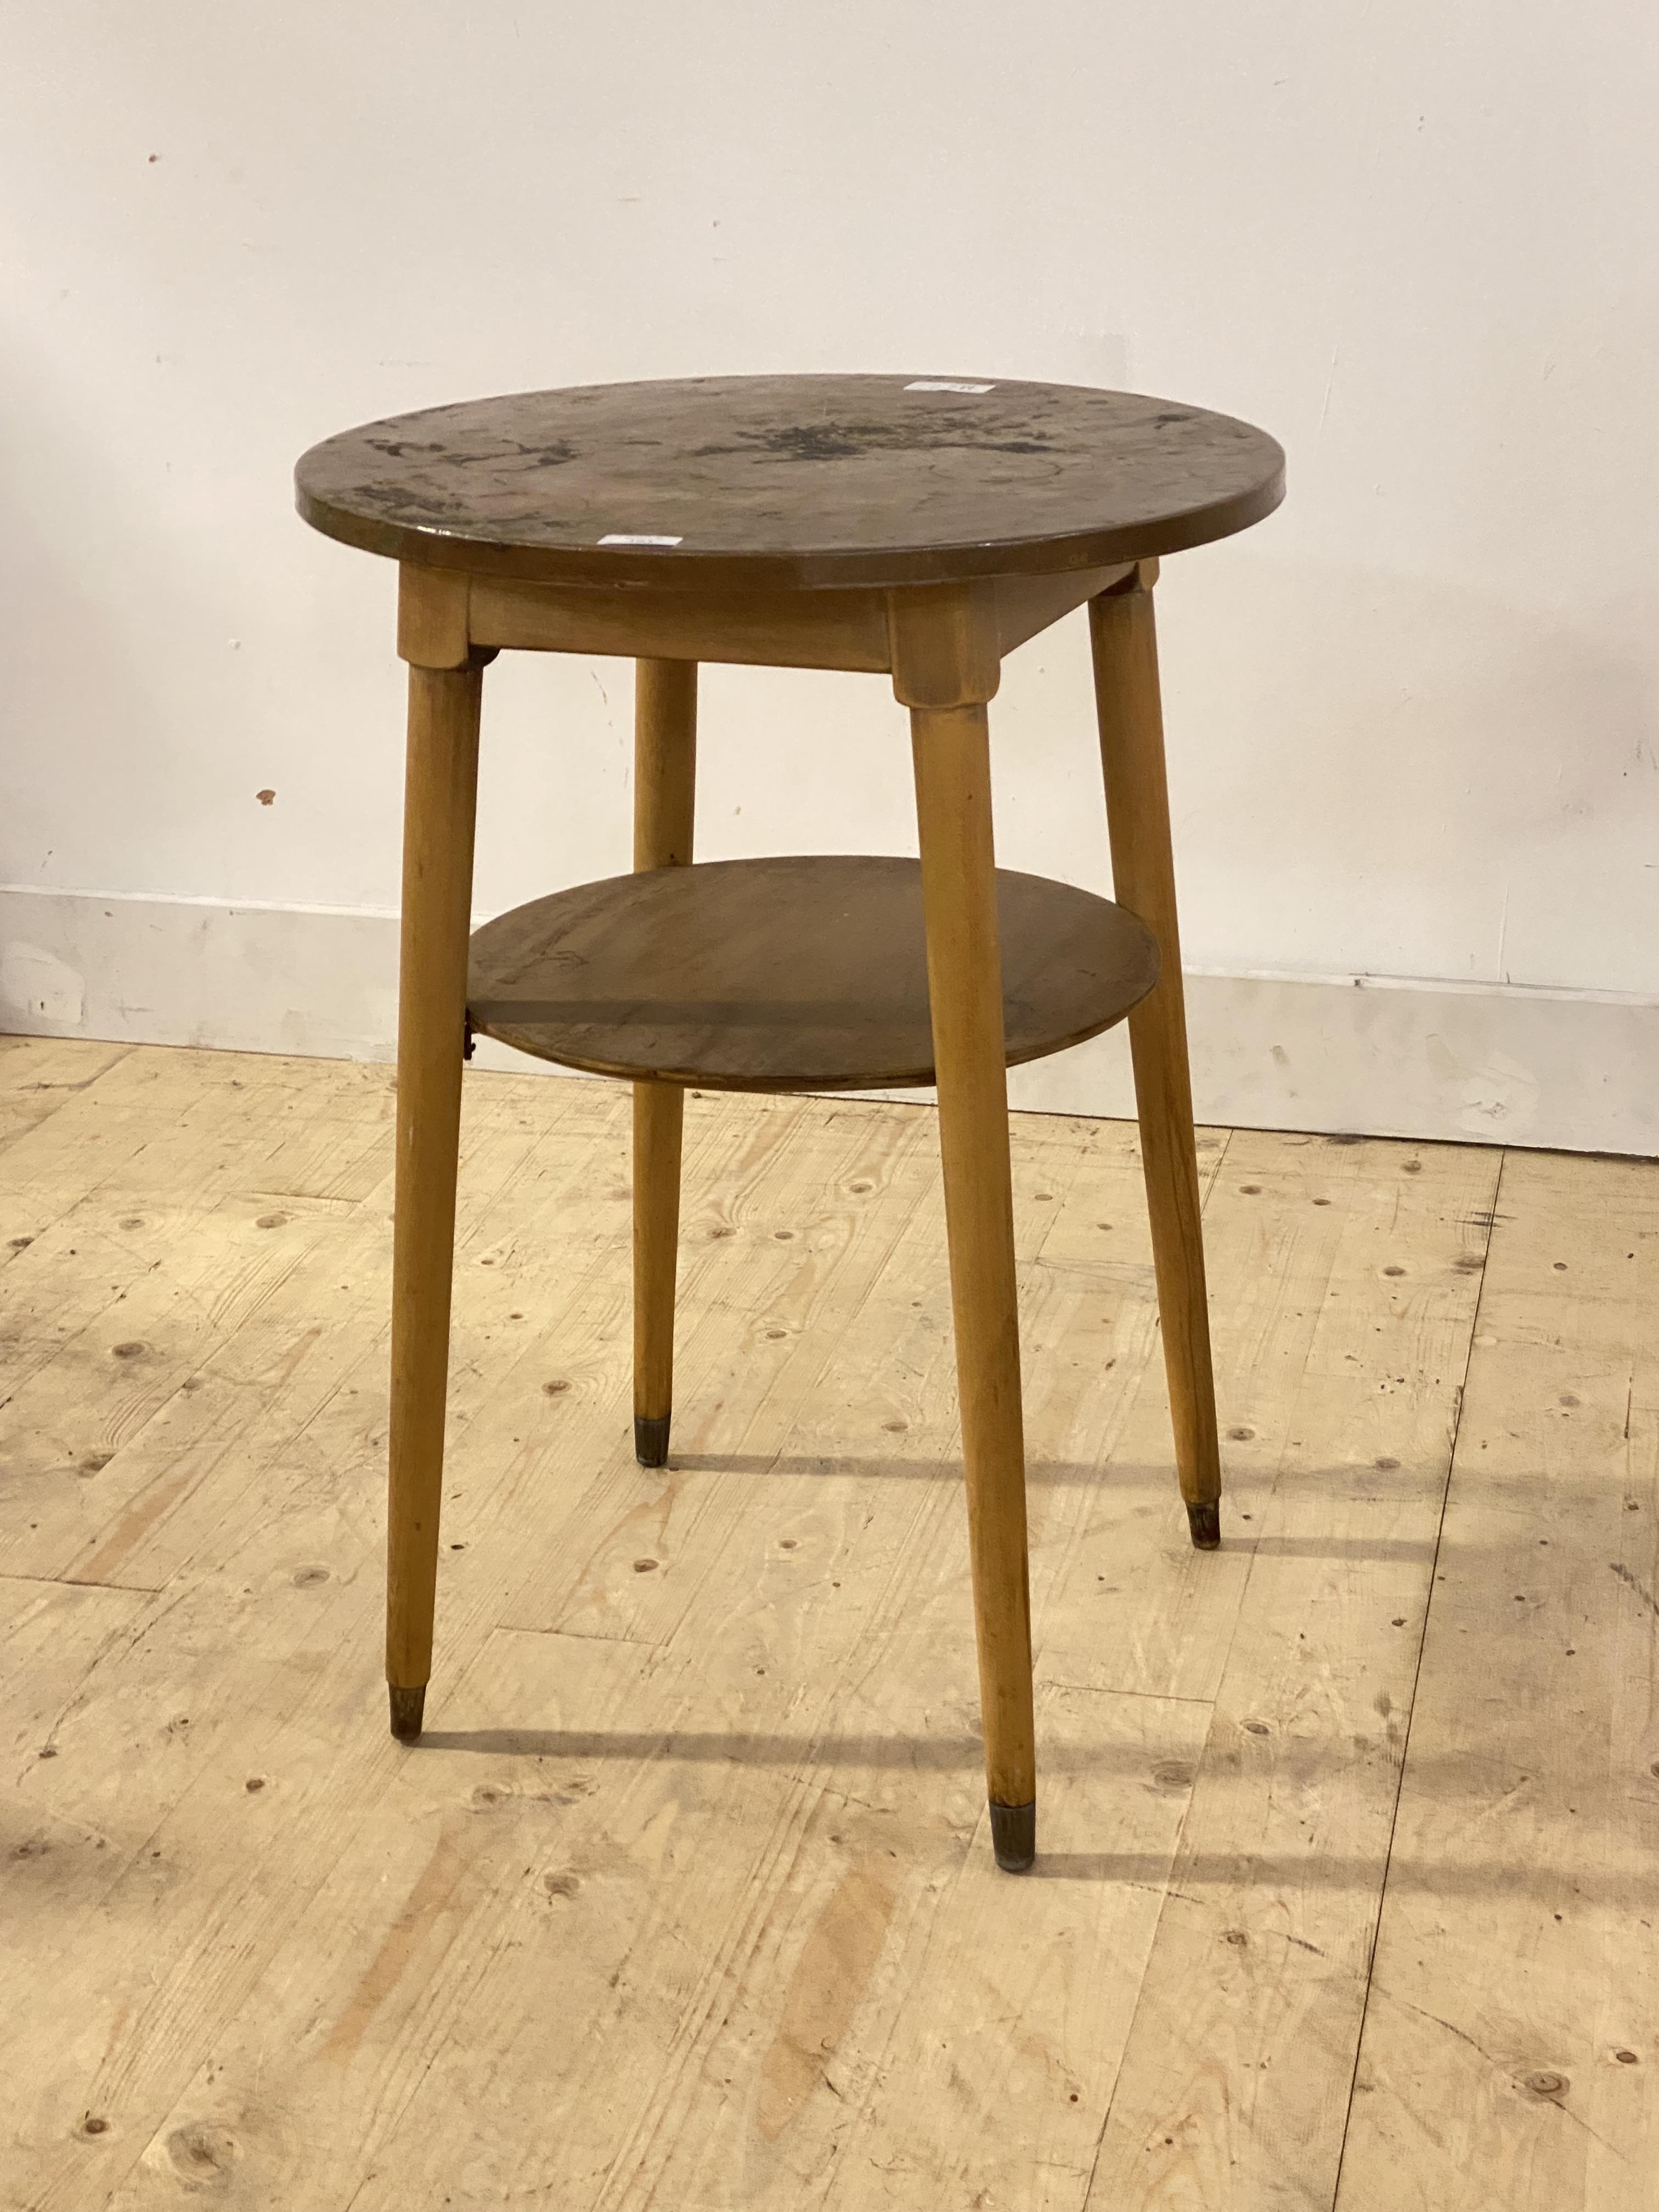 An early 20th century occasional table, the circular hammered copper top over turned beech